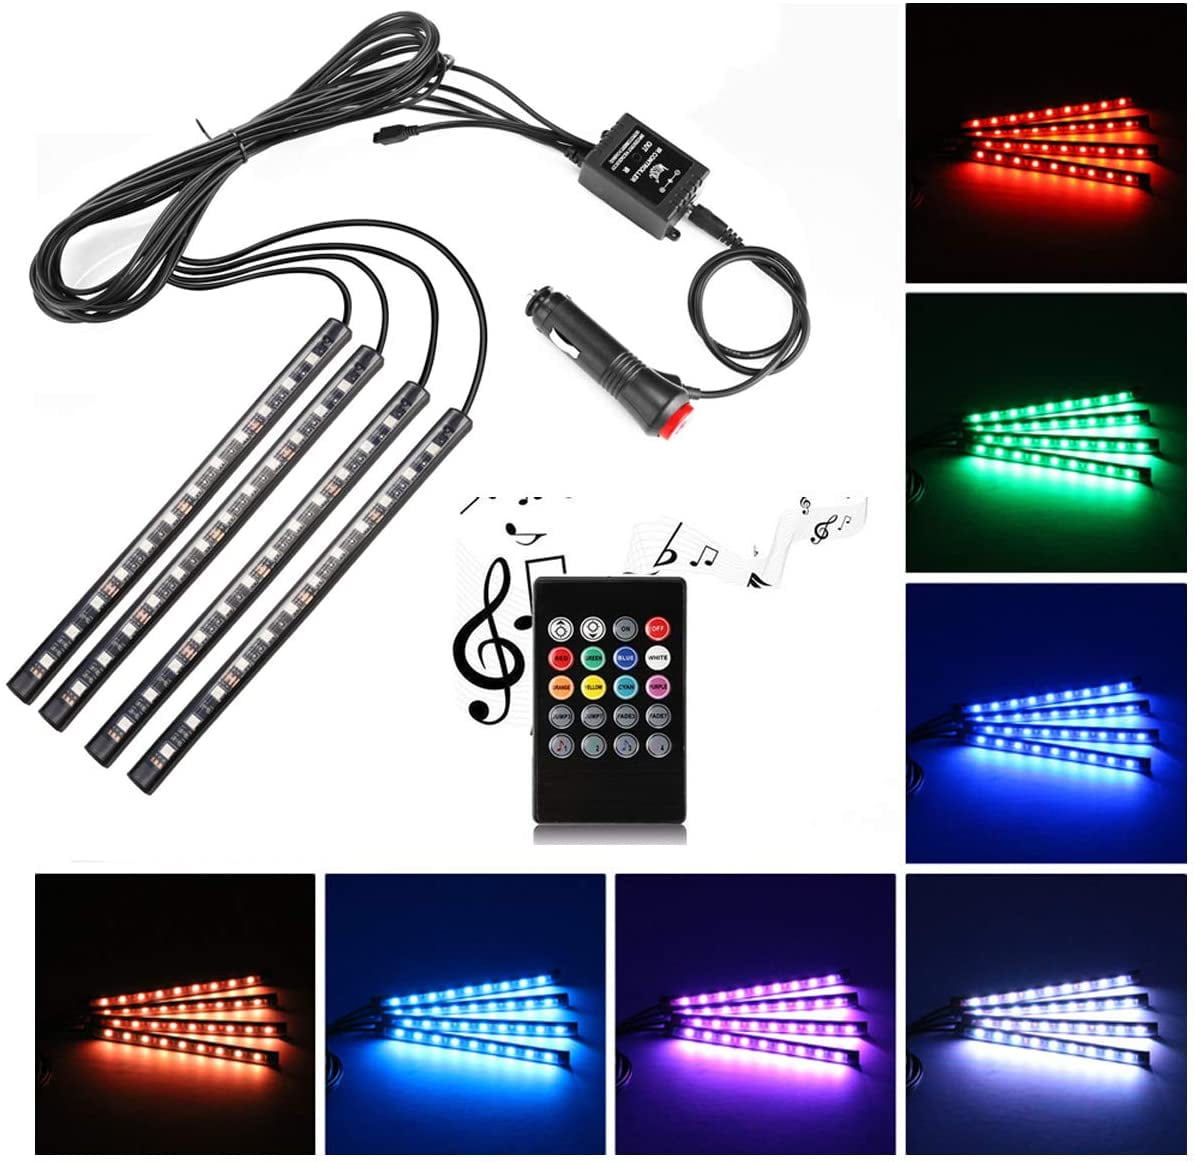 Car LED Music Light Wireless IR Remote&Music Control,4pcs waterproof DC 12V Multicolor Car chassis Light LED for DIY Christmas Home Kitchen Car Bar Indoor Party Total 198 LED 